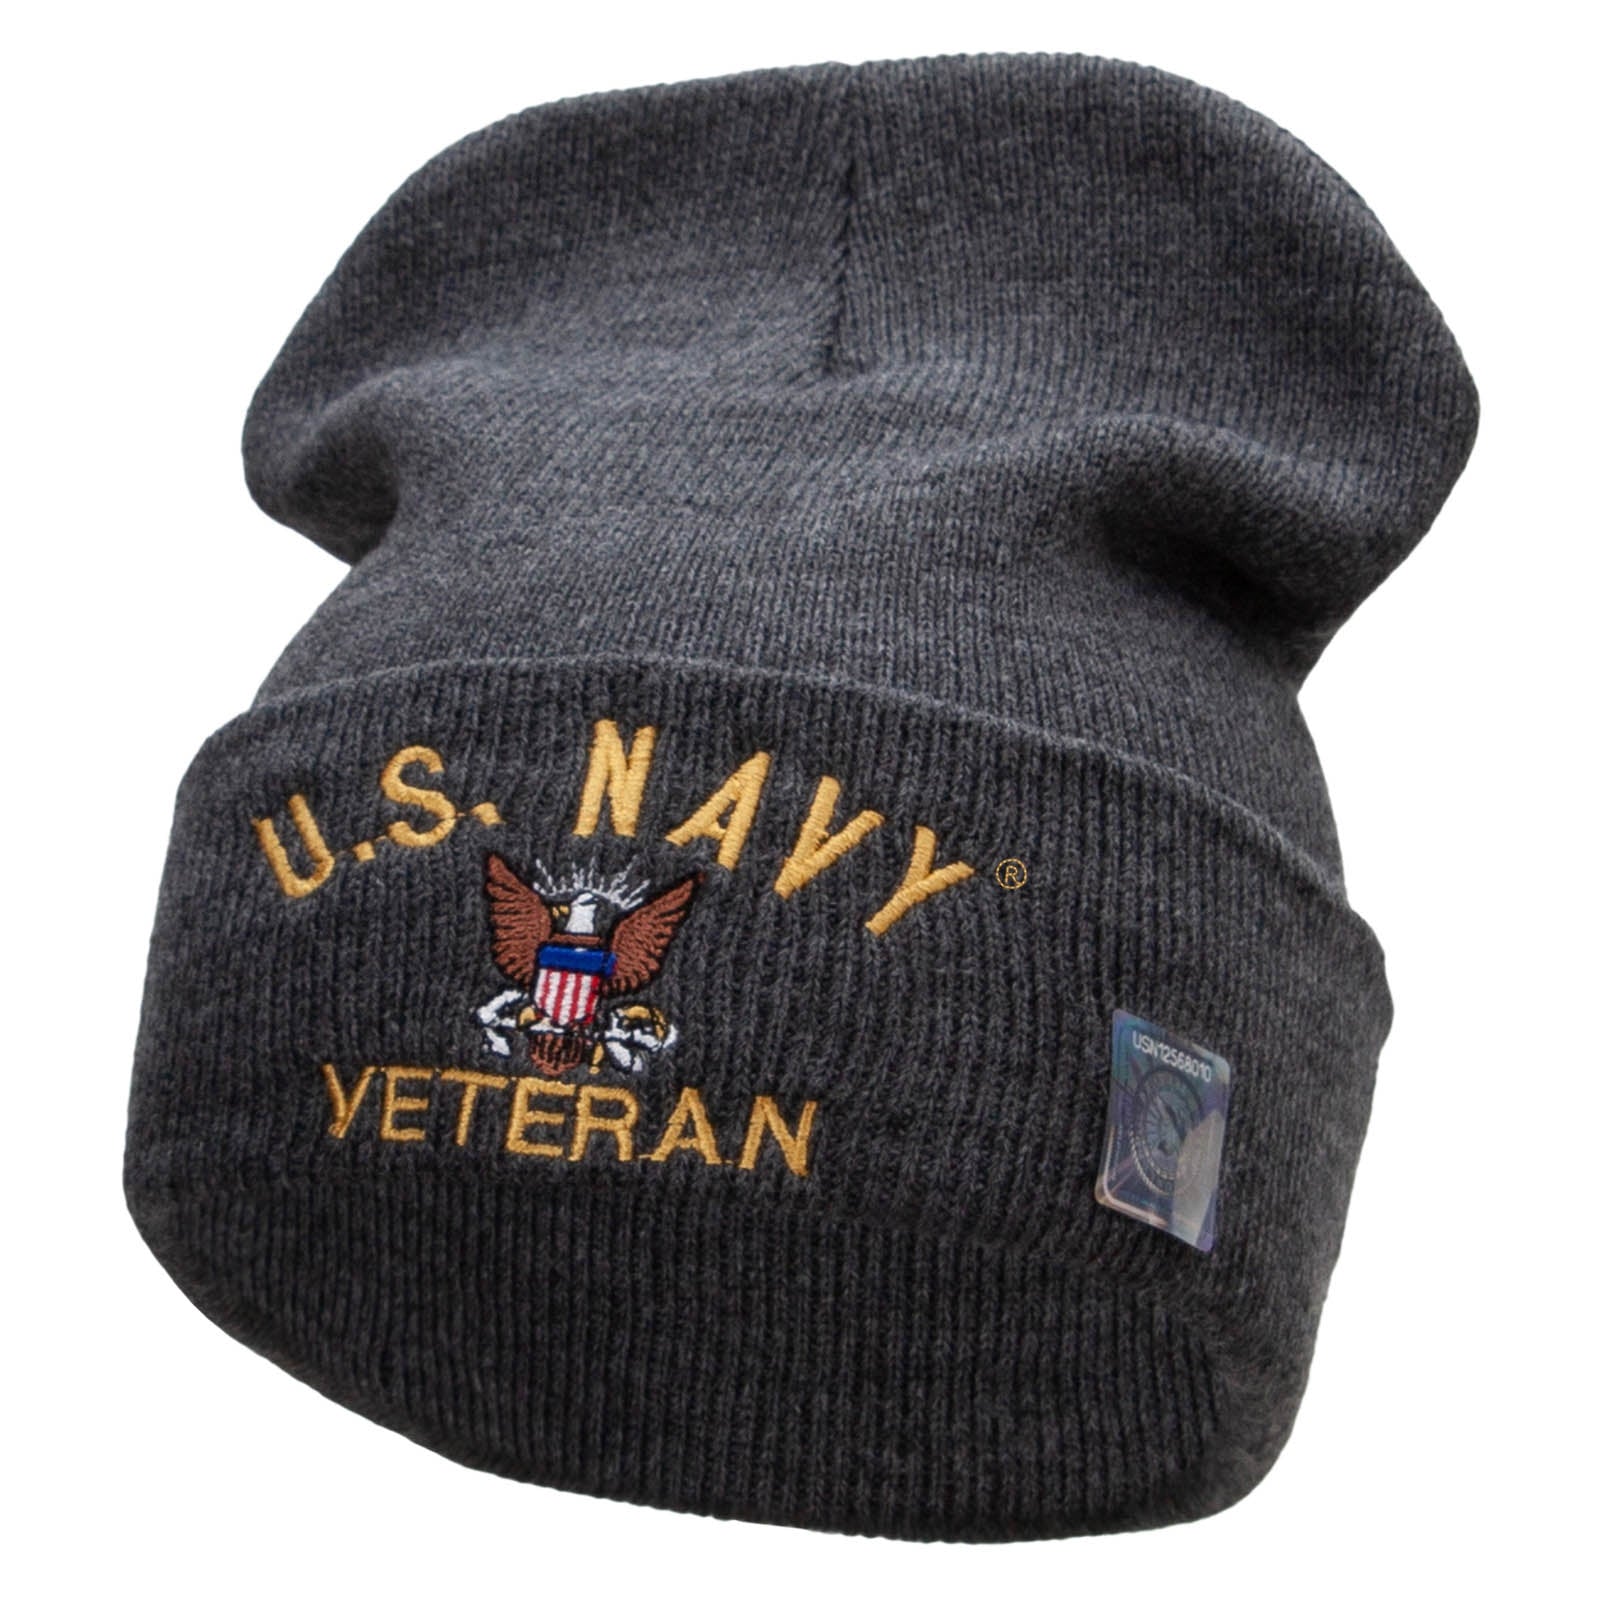 Licensed US Navy Veteran Military Embroidered Long Beanie Made in USA - Dk Grey OSFM